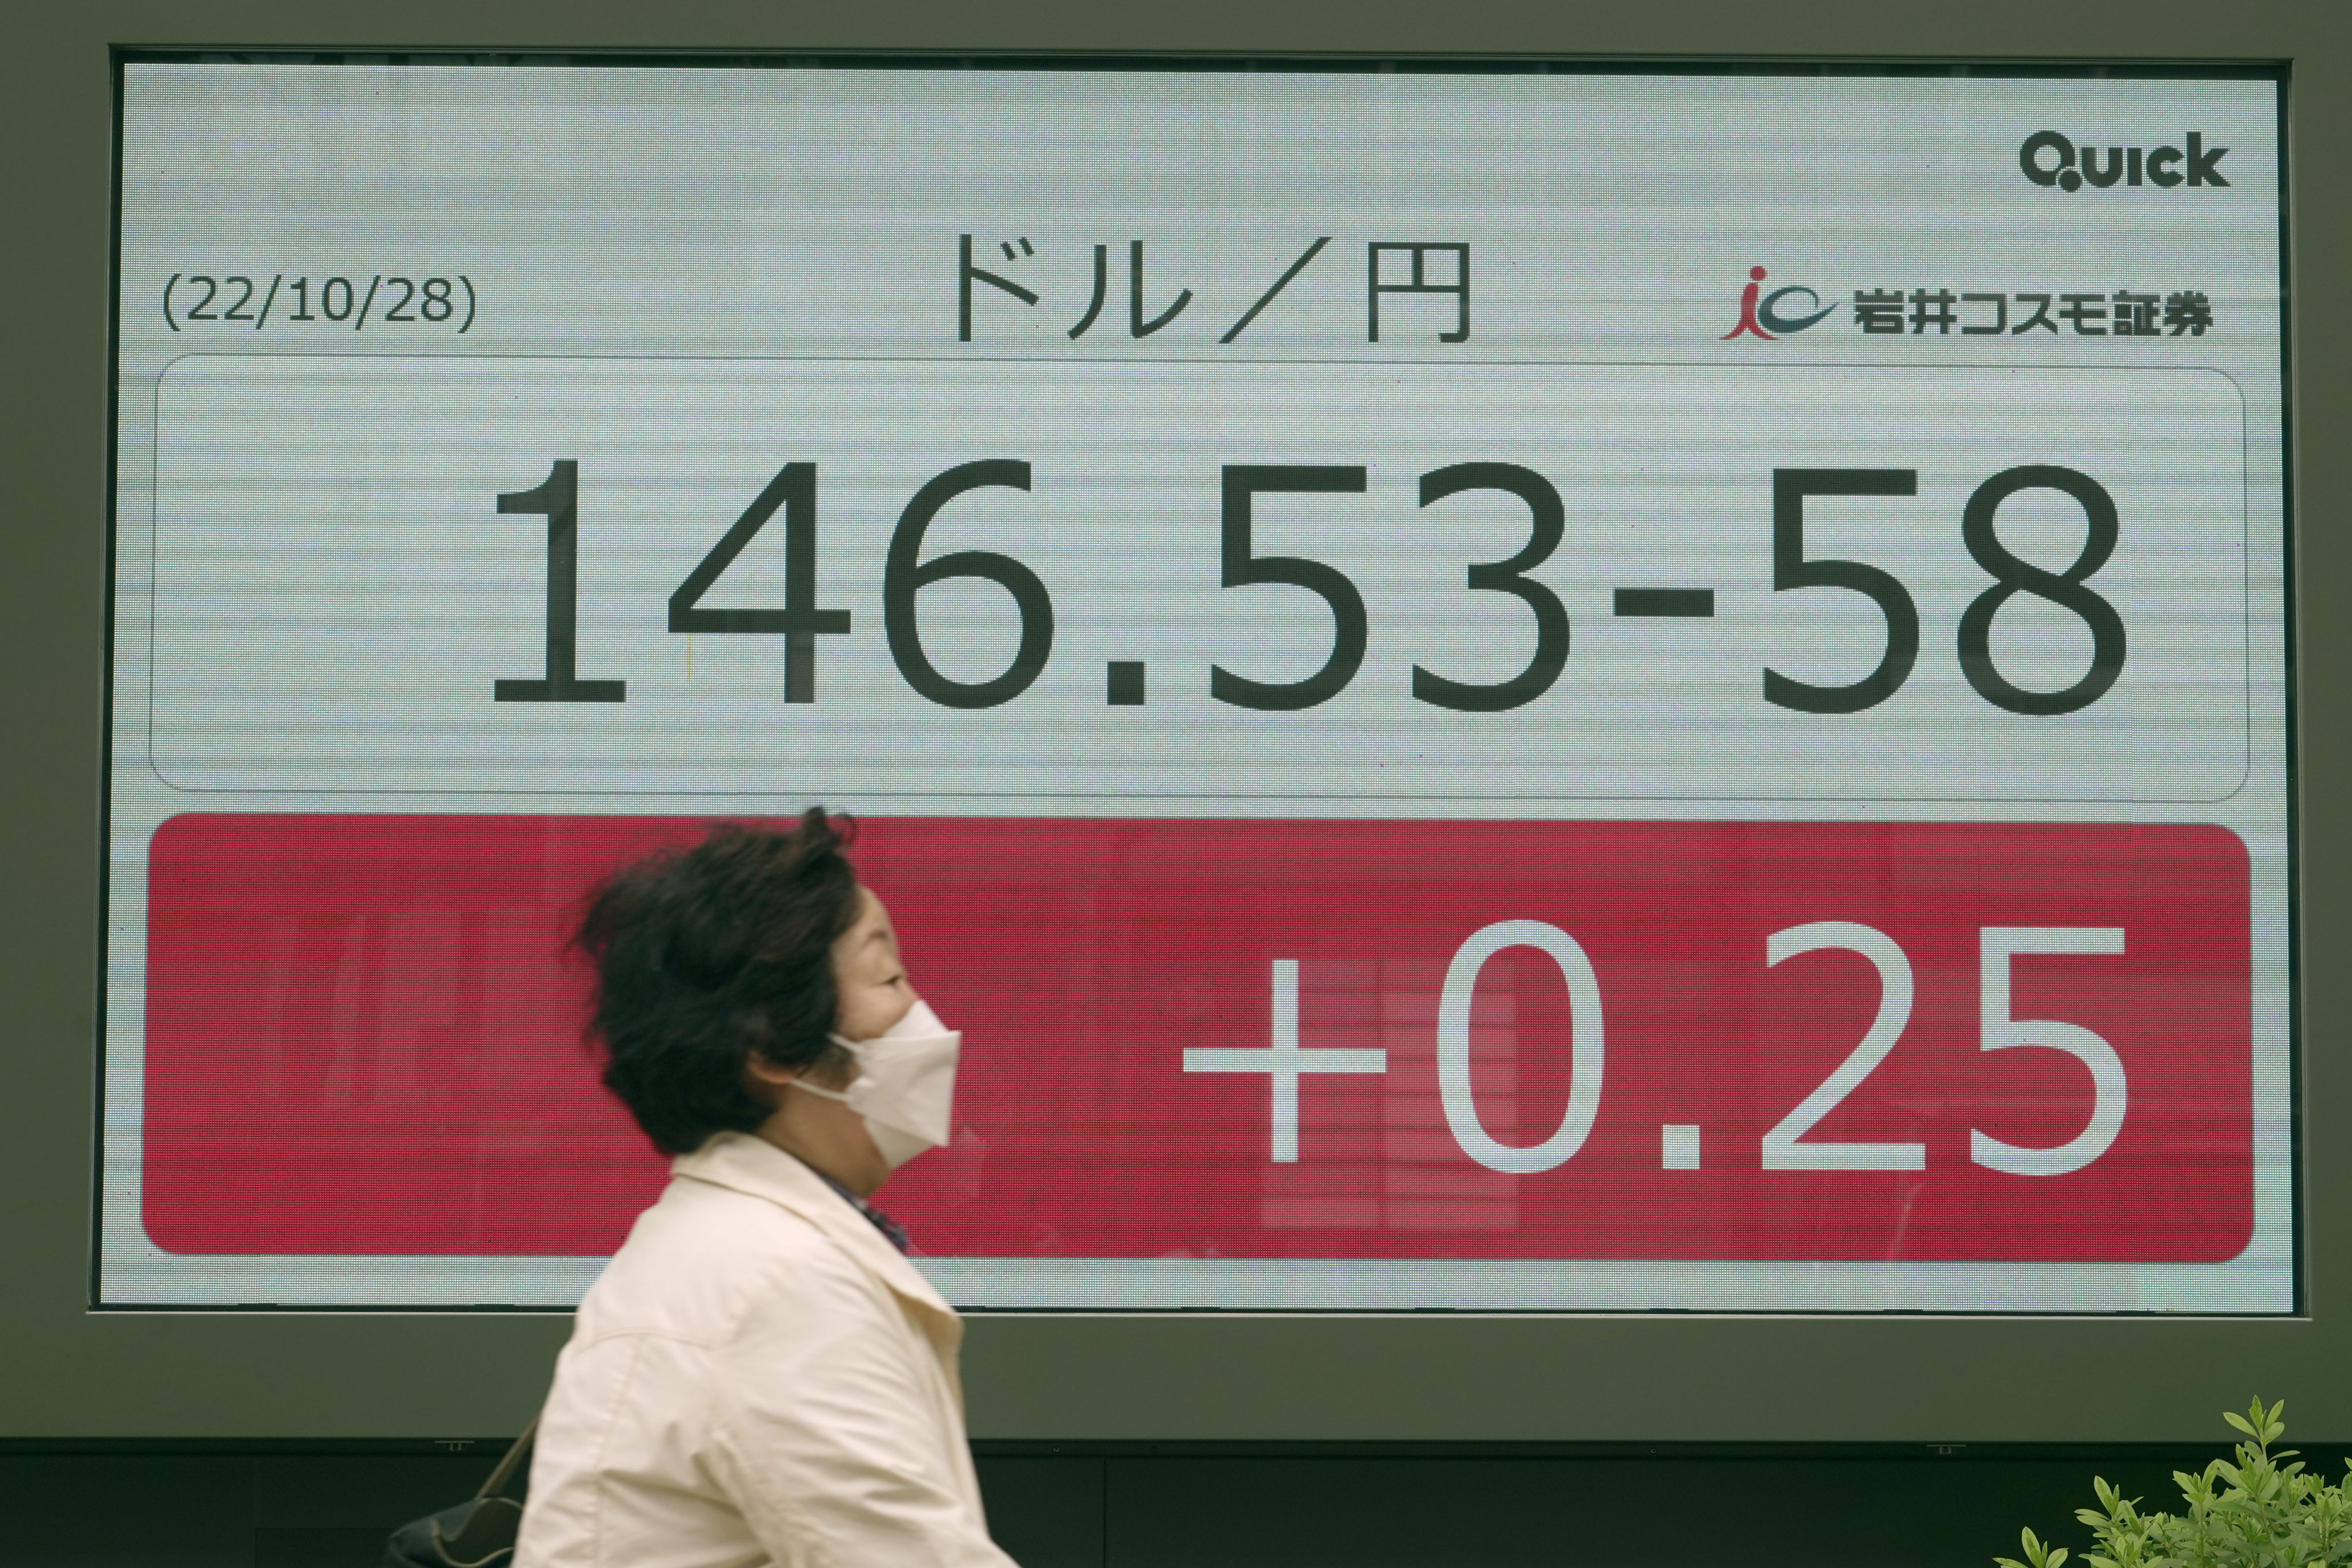 A pedestrian passes in front of an electronic stock board showing Japanese yen-US dollar conversion rate at a securities firm in Tokyo on October 28. A weakening of the yen against the dollar has amplified costs for imports. Photo: AP